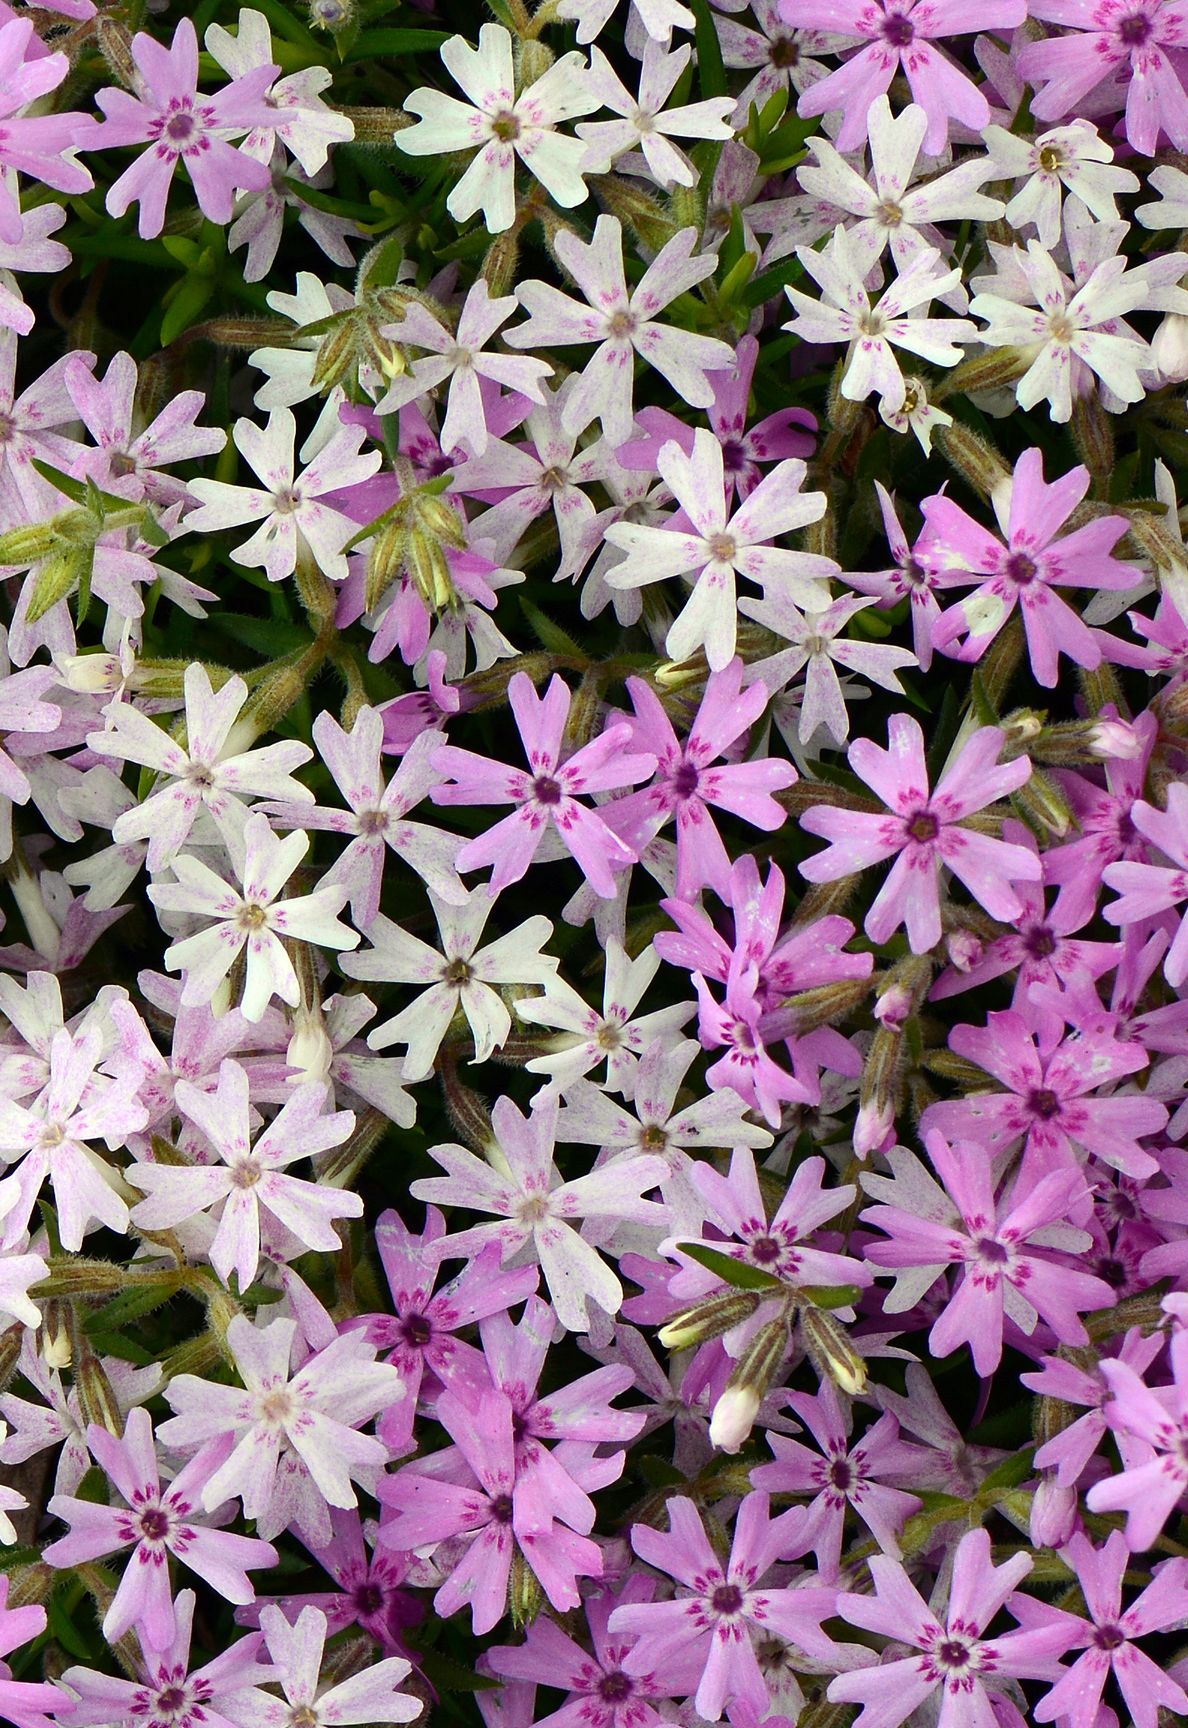 images/plants/phlox/phl-perfectly-puzzling/phl-perfectly-puzzling-0009.jpg